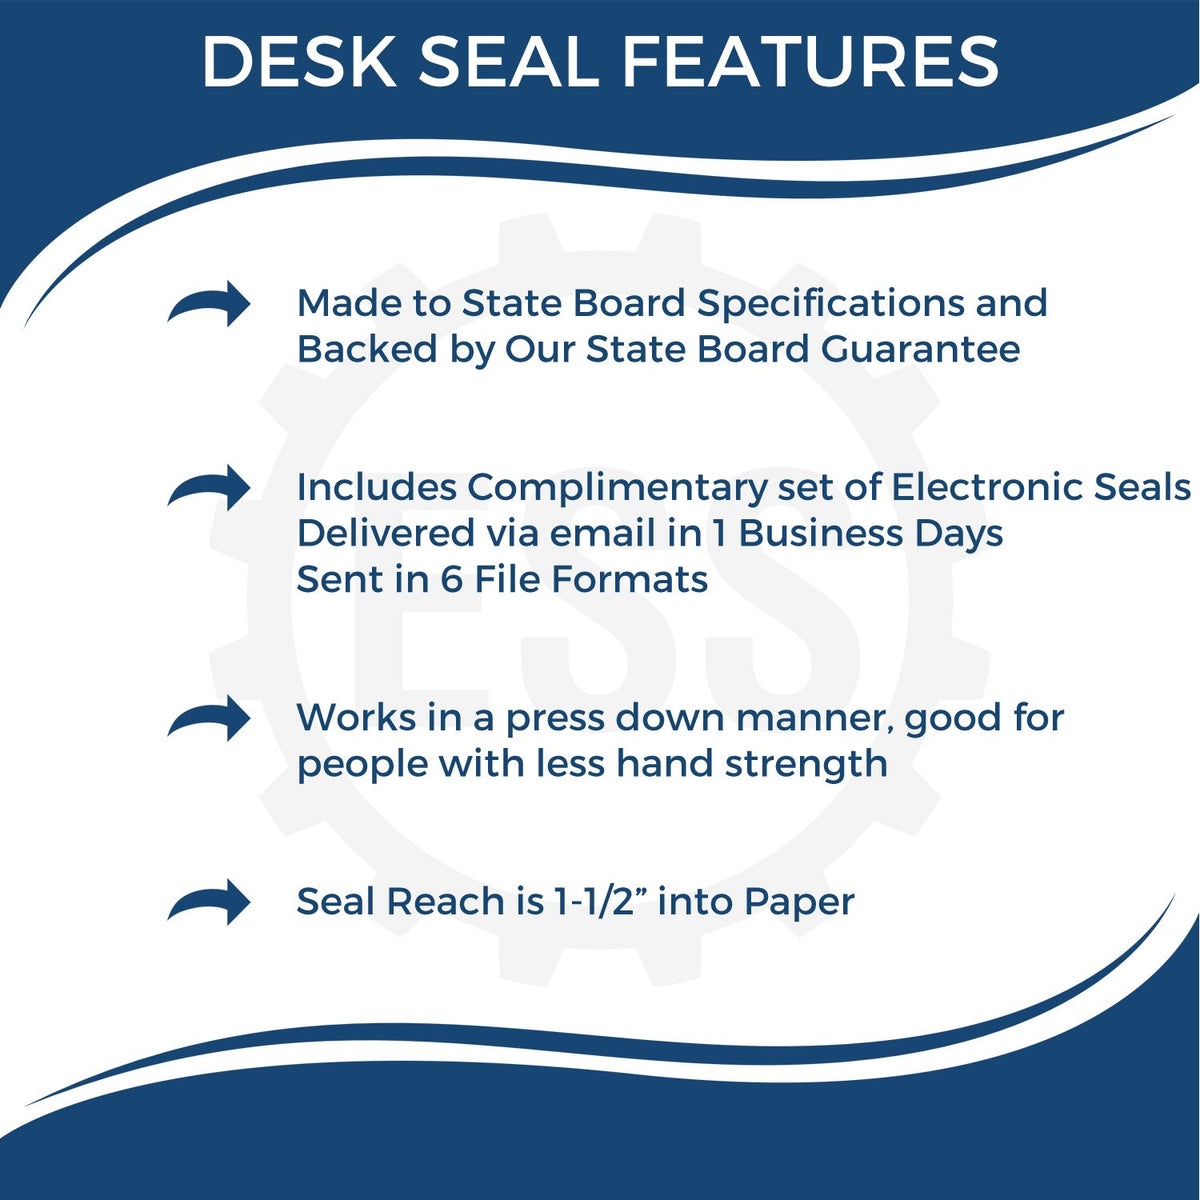 A picture of an infographic highlighting the selling points for the Minnesota Engineer Desk Seal